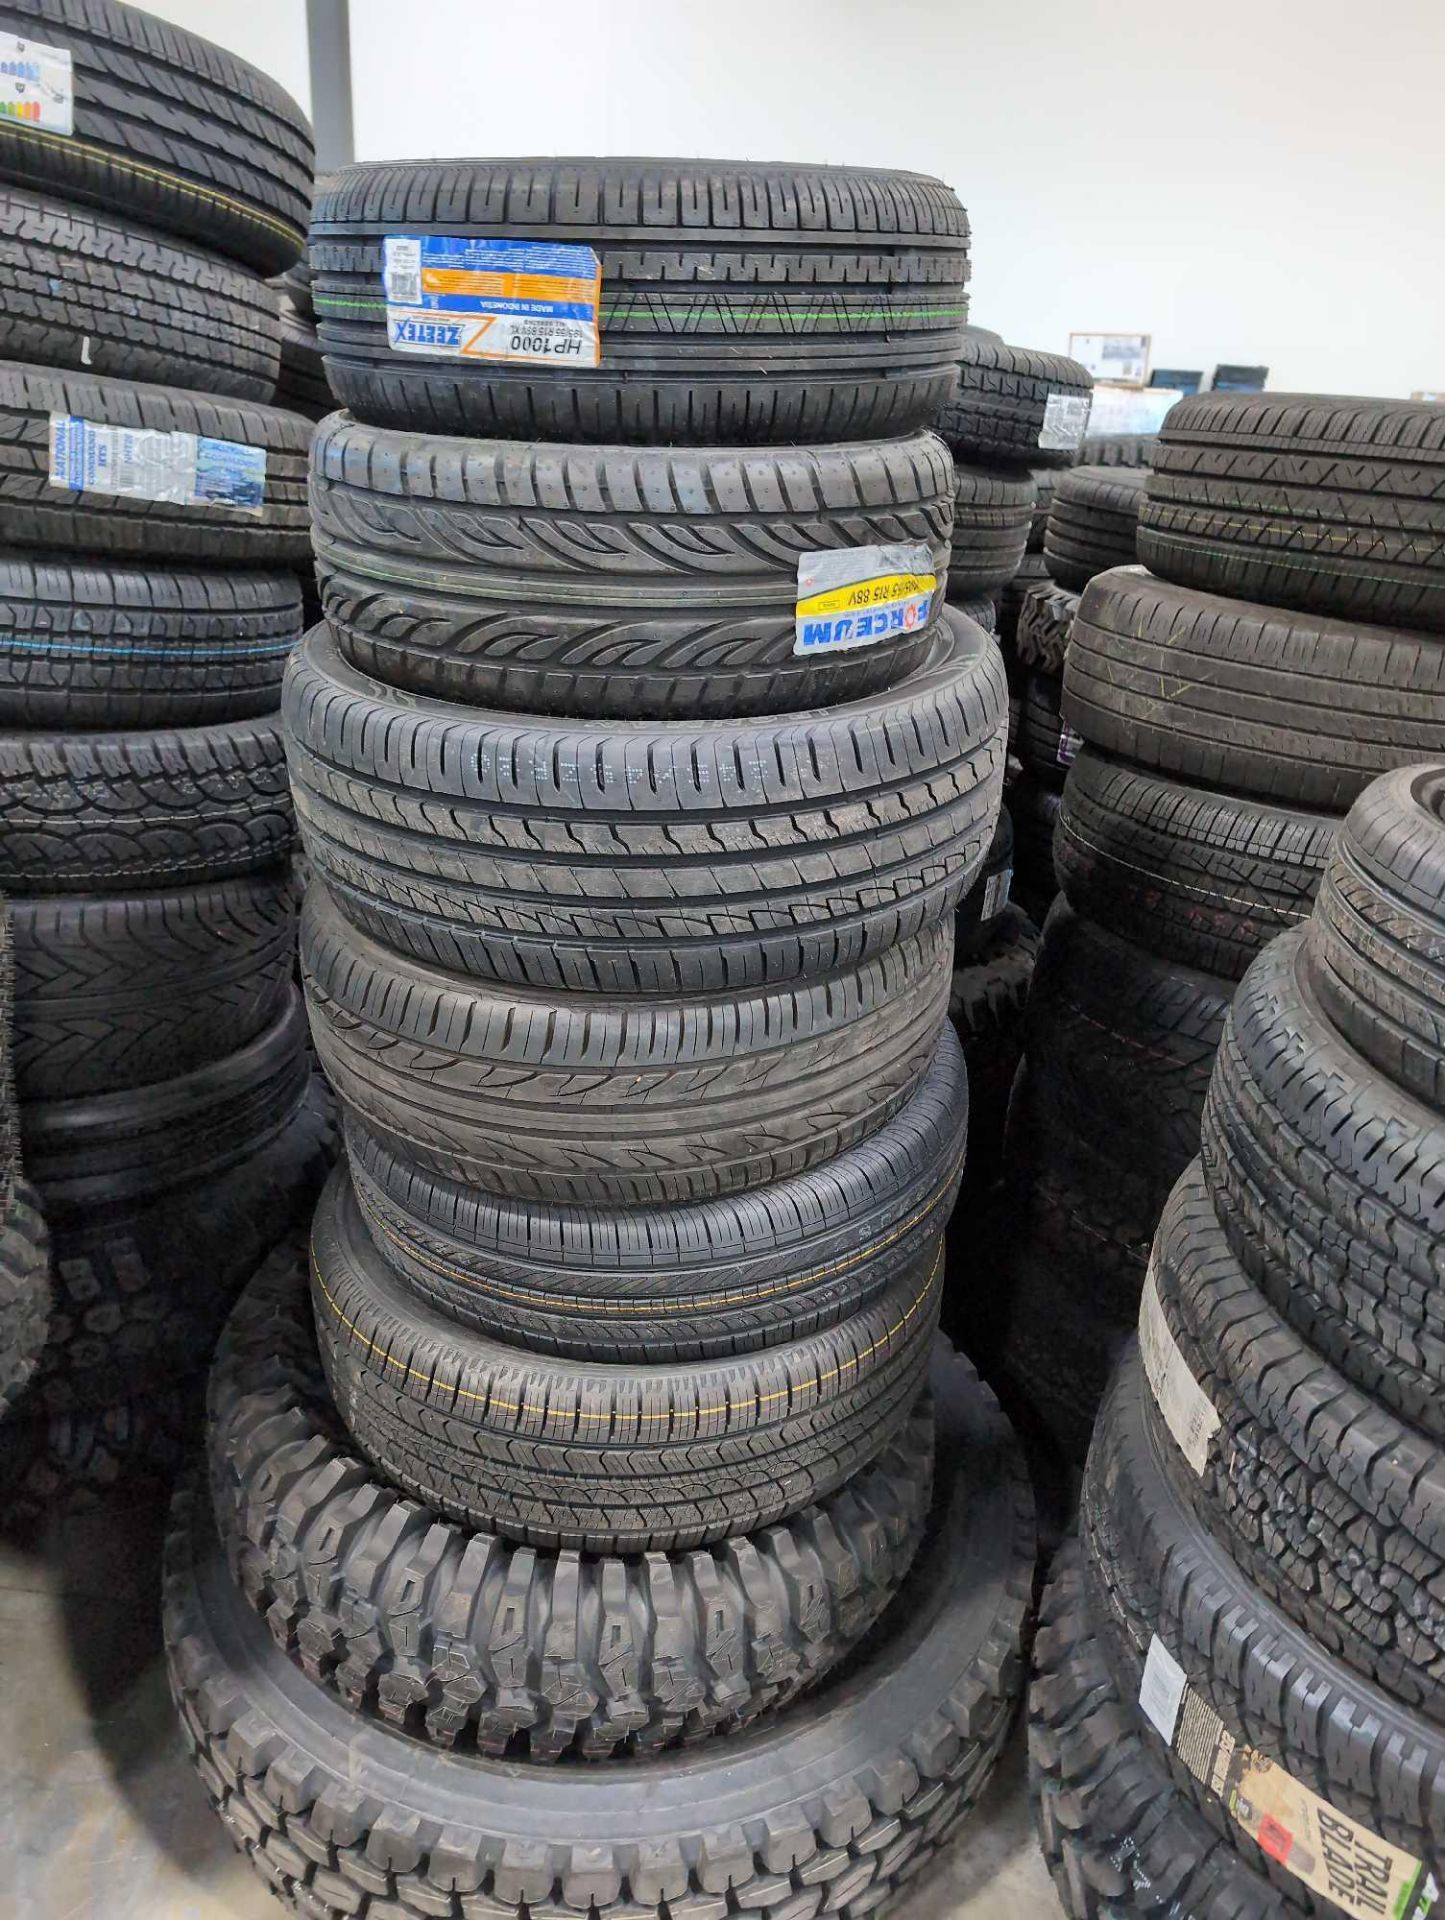 Approx 300 Tires - Image 5 of 48